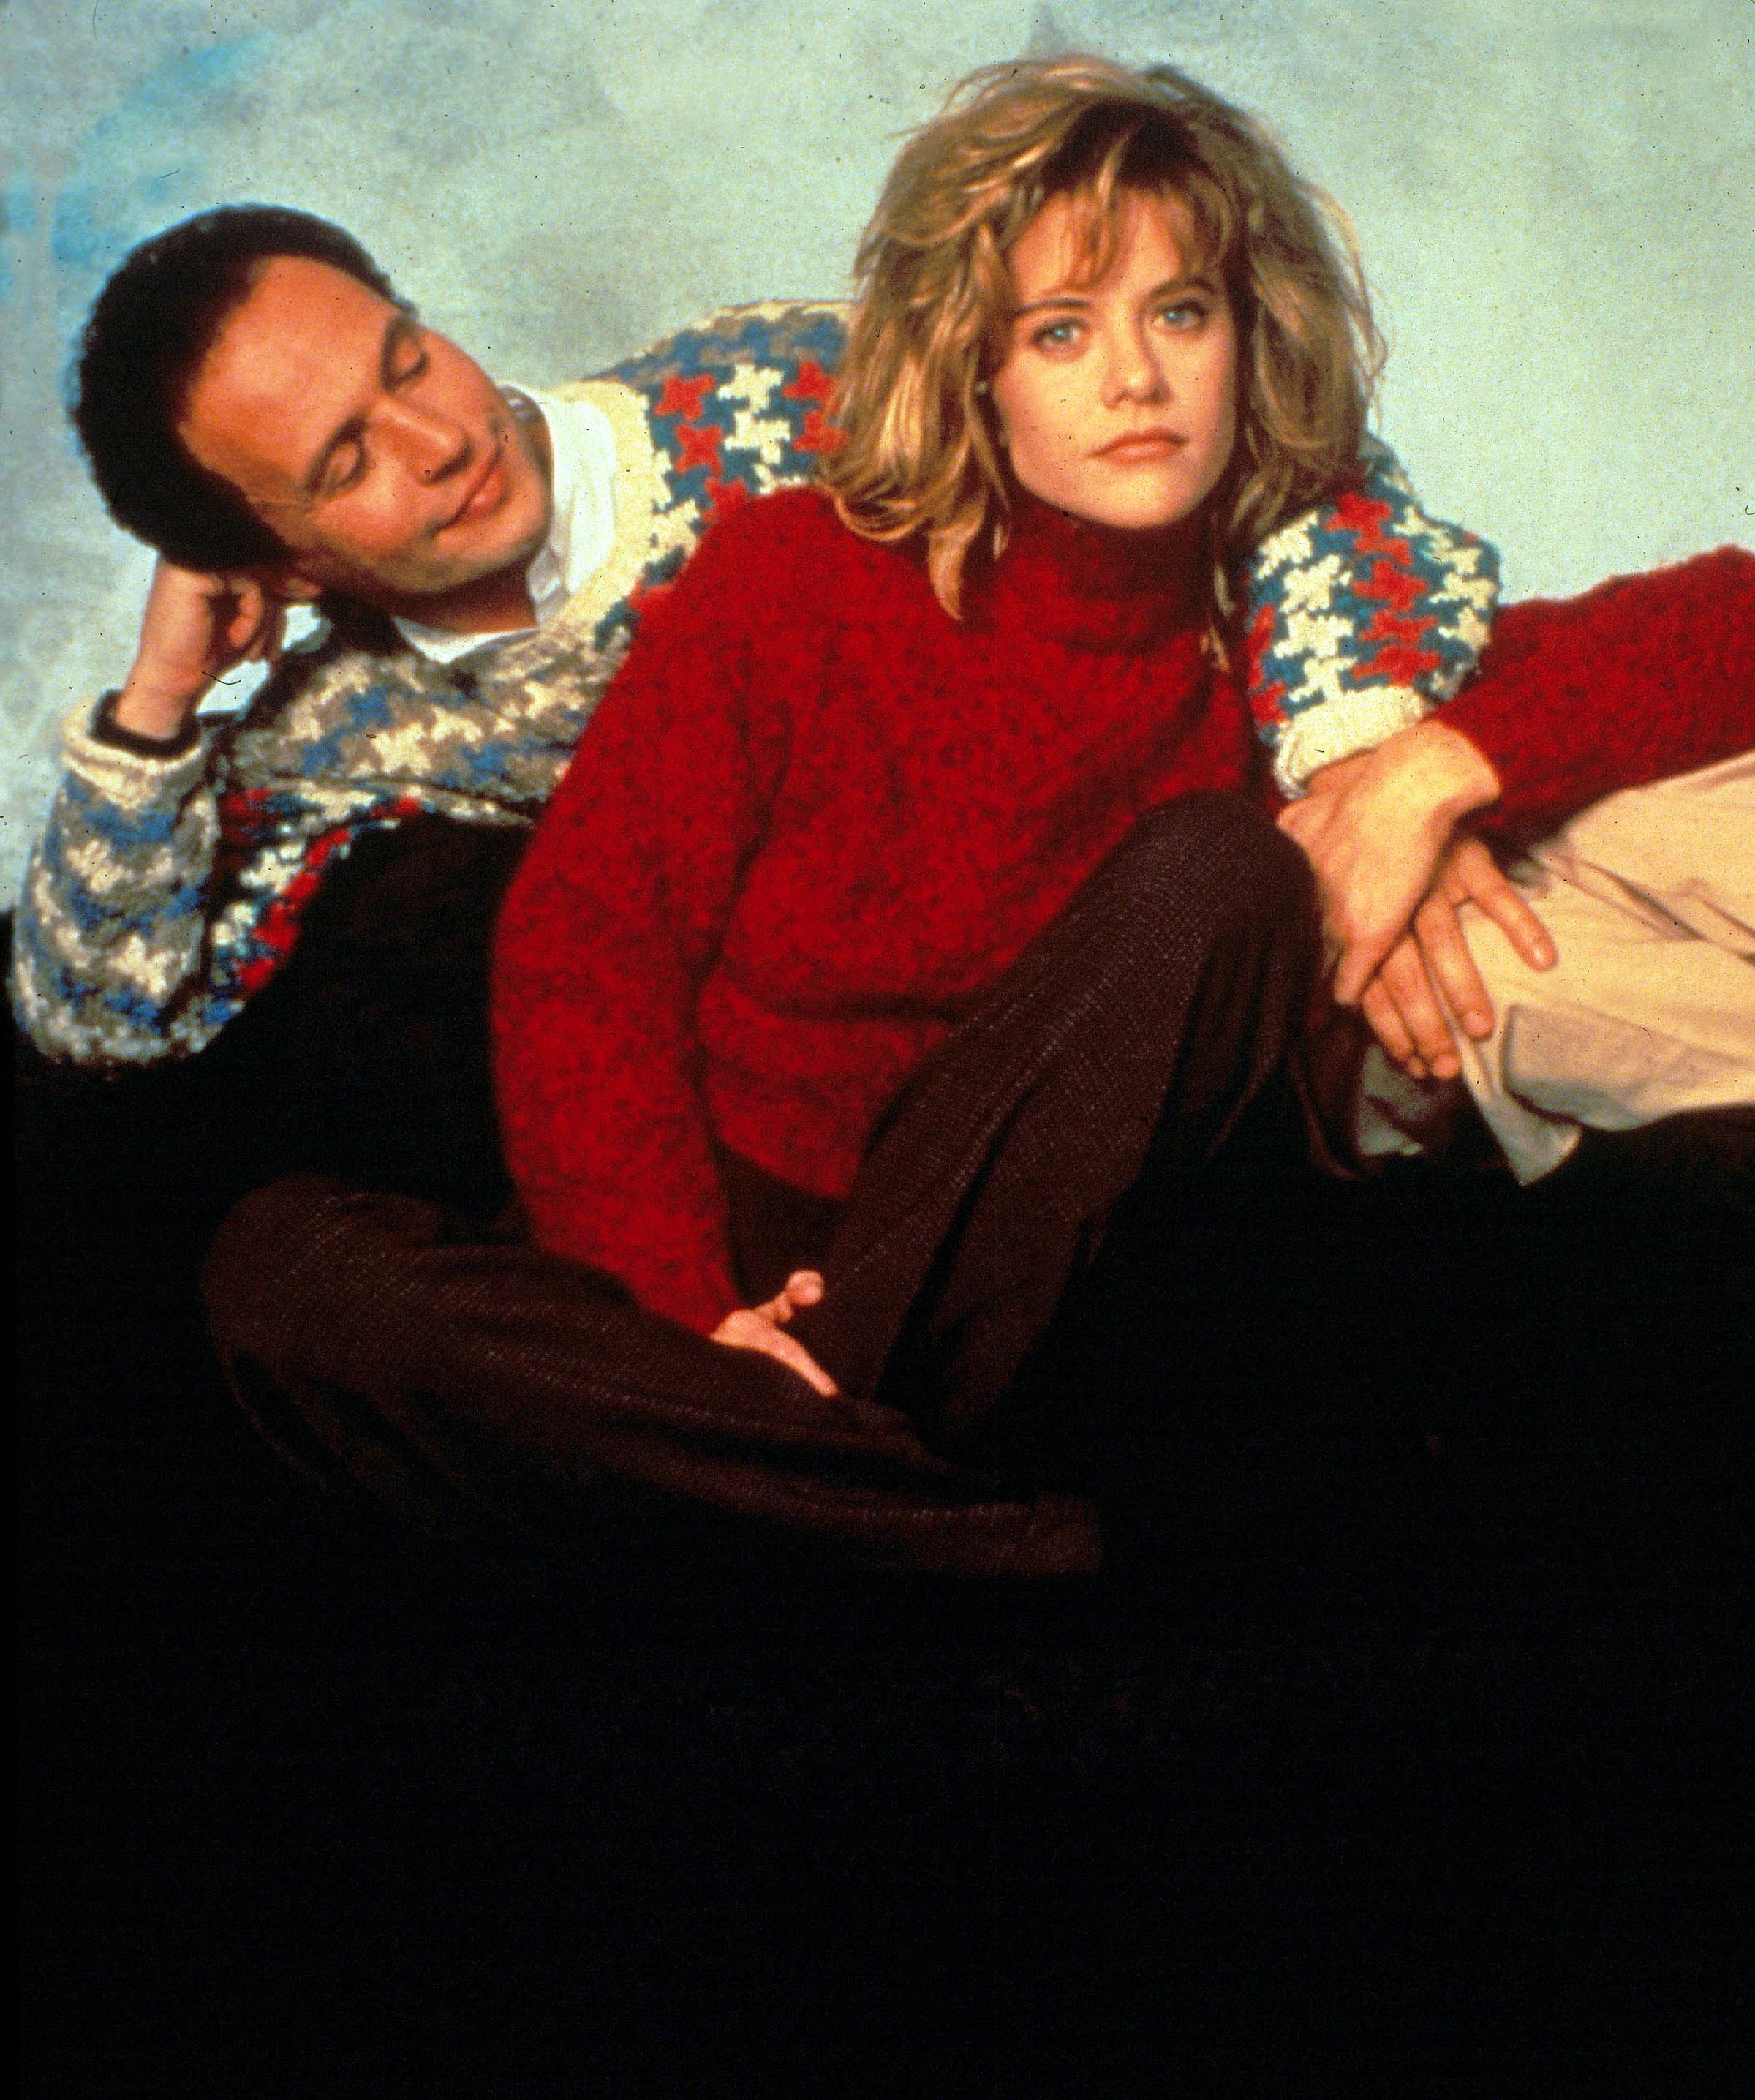 <p>Meg Ryan effortlessly treaded the line between cute and sexy when she starred opposite Billy Crystal in 1989's "When Harry Met Sally." But years later, she looked like an entirely different person.</p>